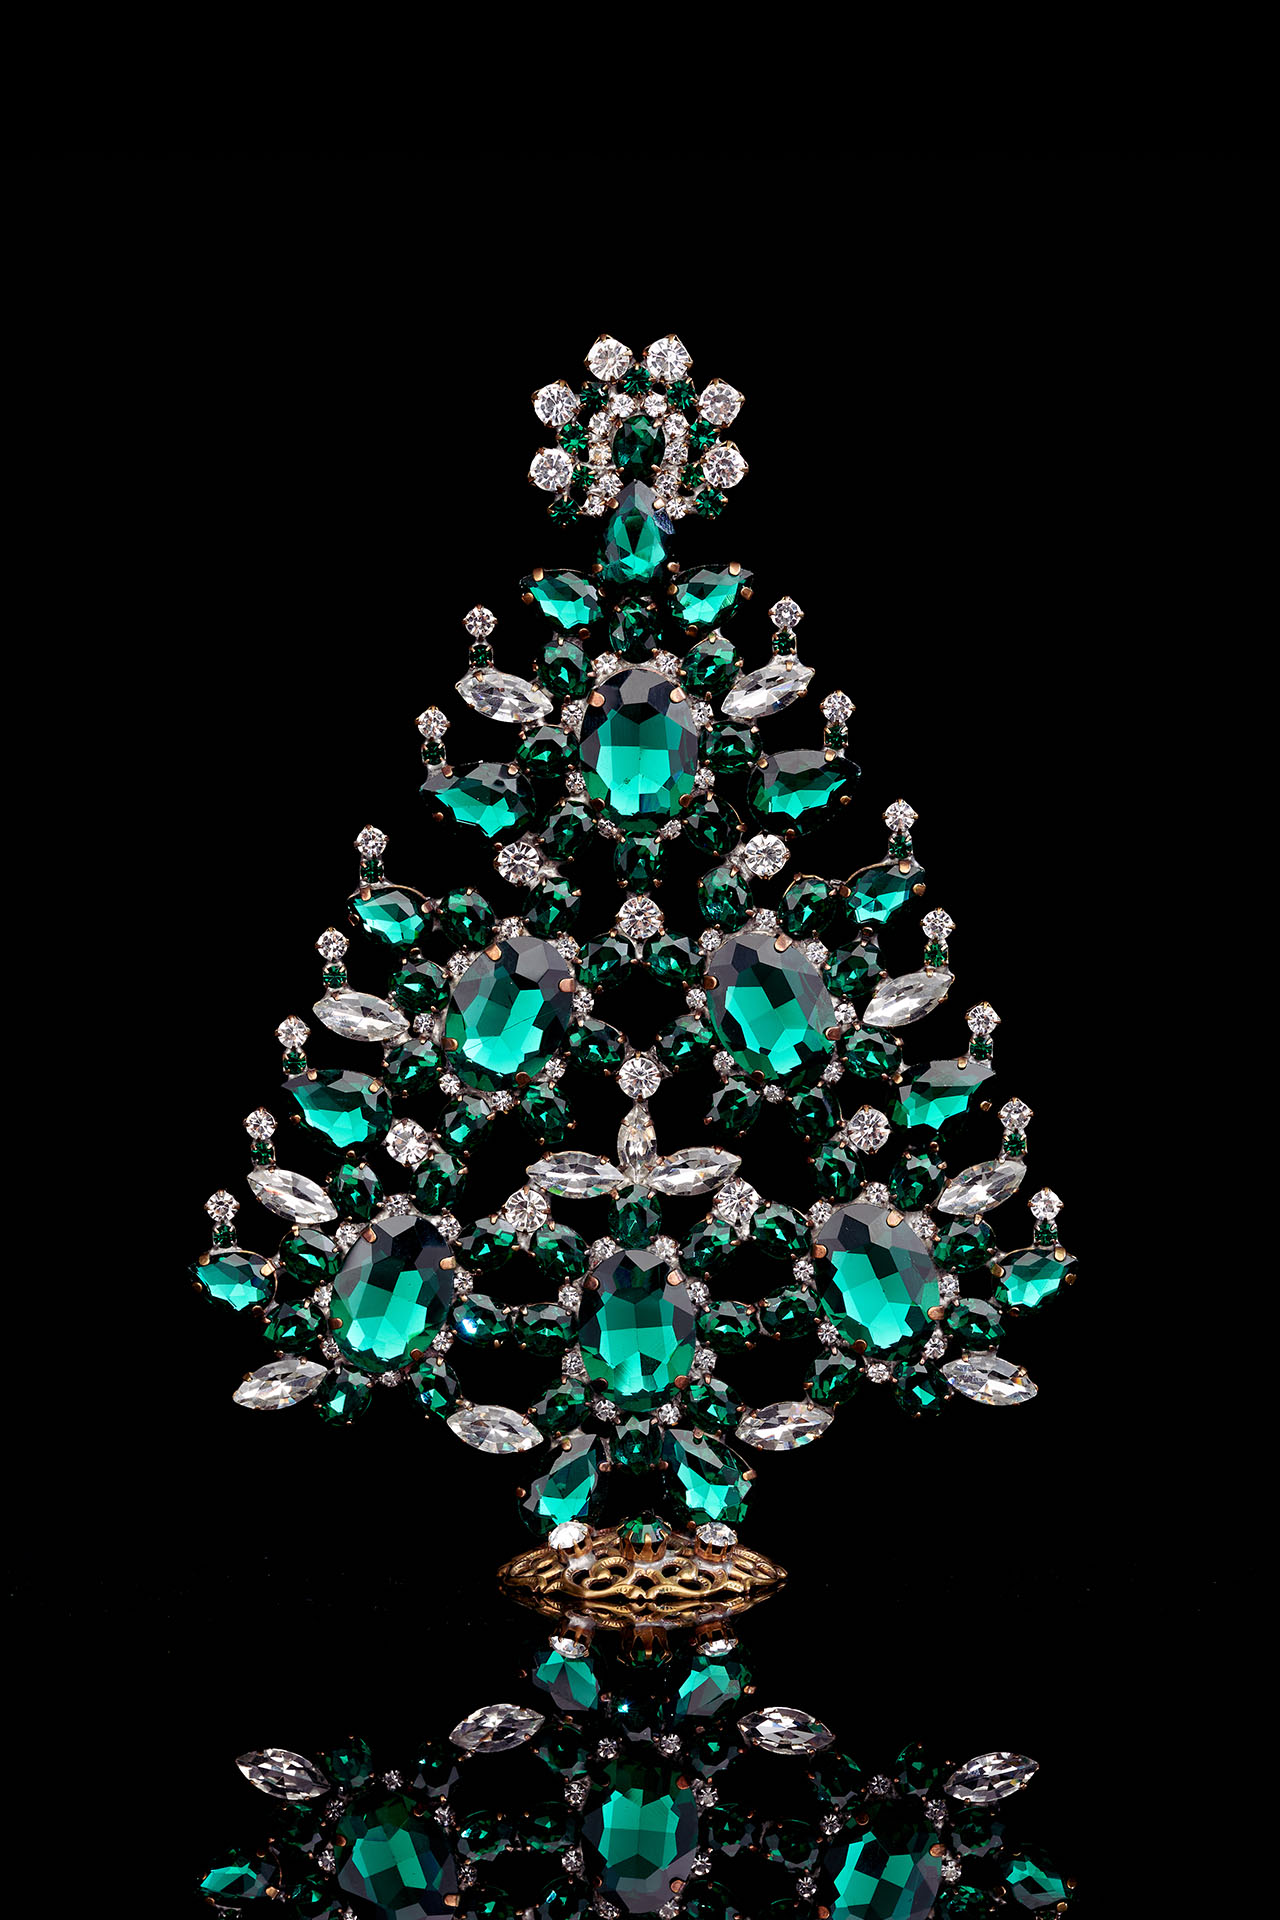 Decorated christmas tree with green rhinestones ornaments